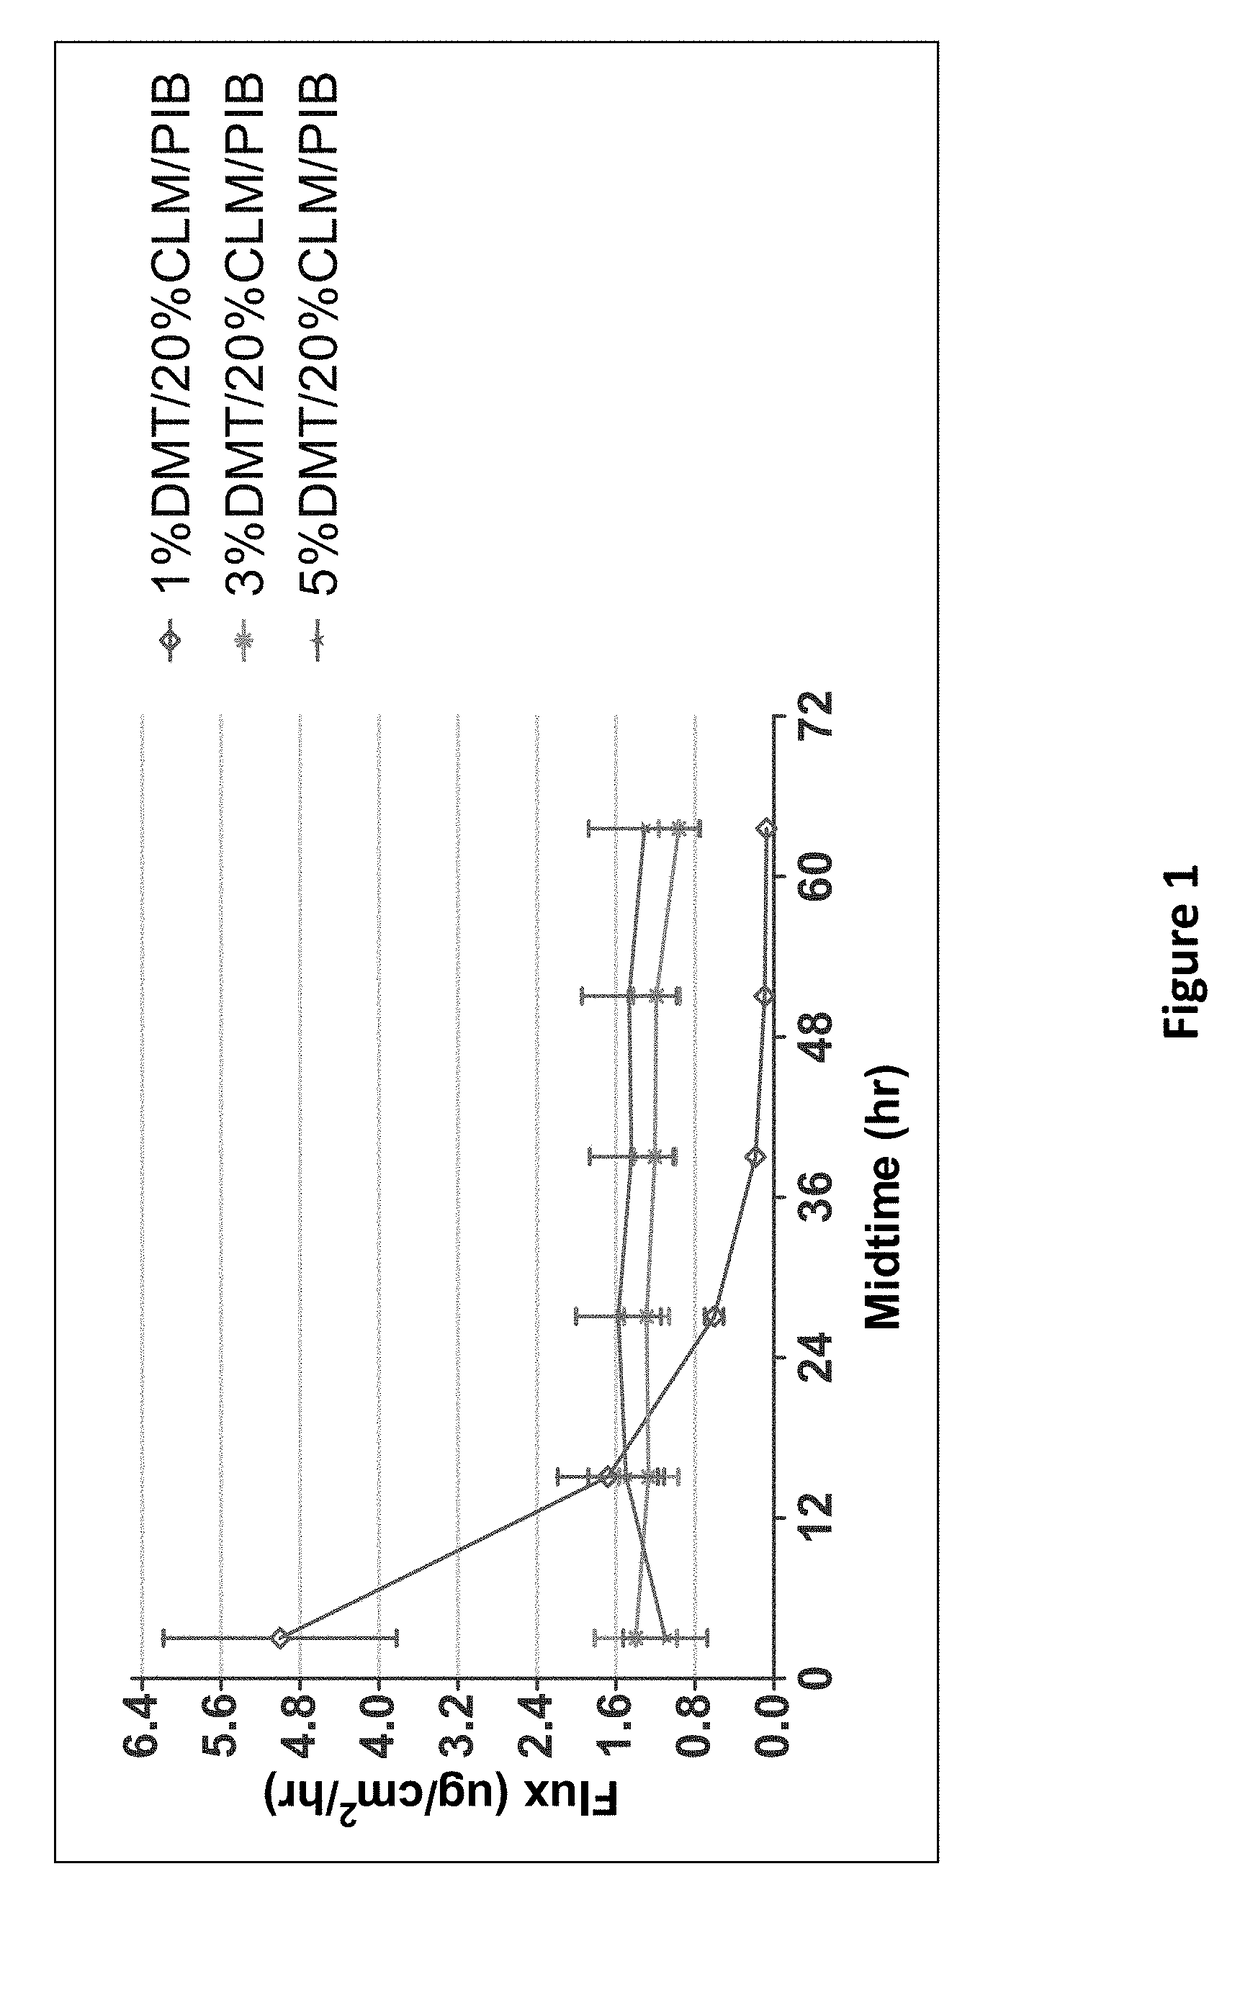 Methods of Managing Pain Using Dexmedetomidine Transdermal Delivery Devices